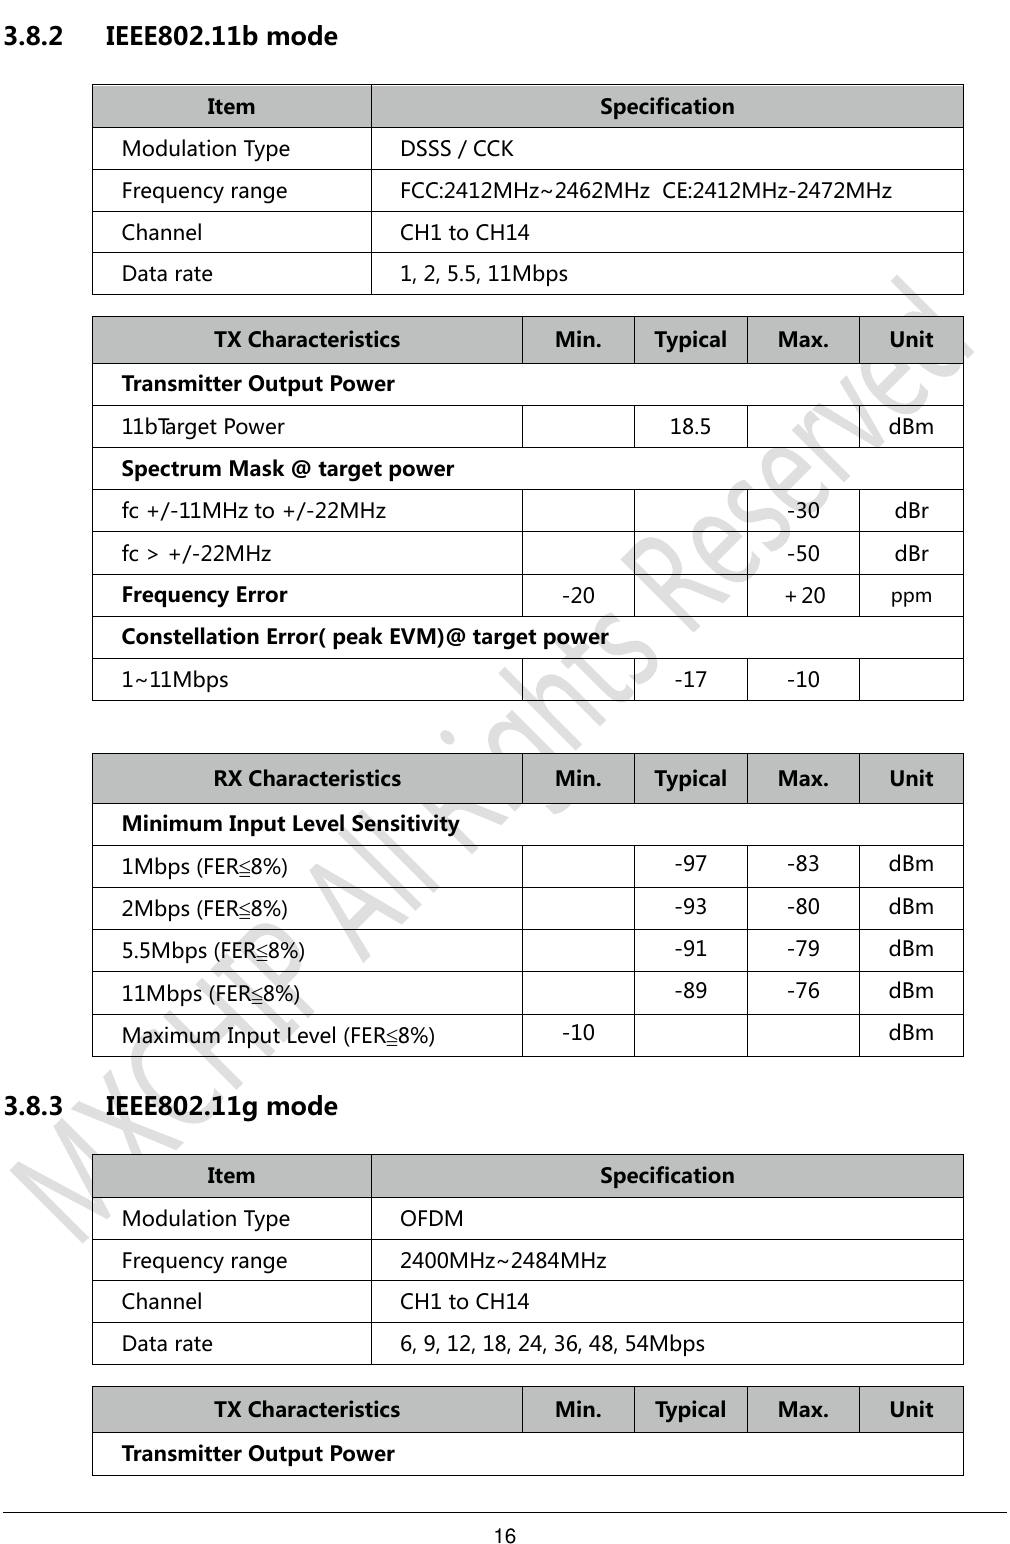 16     3.8.2 IEEE802.11b mode Item  Specification Modulation Type  DSSS / CCK Frequency range  FCC:2412MHz~2462MHz  CE:2412MHz-2472MHz Channel  CH1 to CH14 Data rate  1, 2, 5.5, 11Mbps  TX Characteristics  Min.  Typical  Max.  Unit Transmitter Output Power 11bTarget Power  18.5  dBm Spectrum Mask @ target power fc +/-11MHz to +/-22MHz     -30 dBr fc &gt; +/-22MHz     -50 dBr Frequency Error -20    ＋20  ppm Constellation Error( peak EVM)@ target power 1~11Mbps  -17  -10   RX Characteristics  Min.  Typical  Max.  Unit Minimum Input Level Sensitivity 1Mbps (FER≦8%)   -97  -83 dBm 2Mbps (FER≦8%)   -93  -80 dBm 5.5Mbps (FER≦8%)   -91  -79 dBm 11Mbps (FER≦8%)   -89  -76 dBm Maximum Input Level (FER≦8%) -10      dBm 3.8.3 IEEE802.11g mode Item  Specification Modulation Type  OFDM Frequency range  2400MHz~2484MHz Channel  CH1 to CH14 Data rate  6, 9, 12, 18, 24, 36, 48, 54Mbps  TX Characteristics Min. Typical Max. Unit Transmitter Output Power 